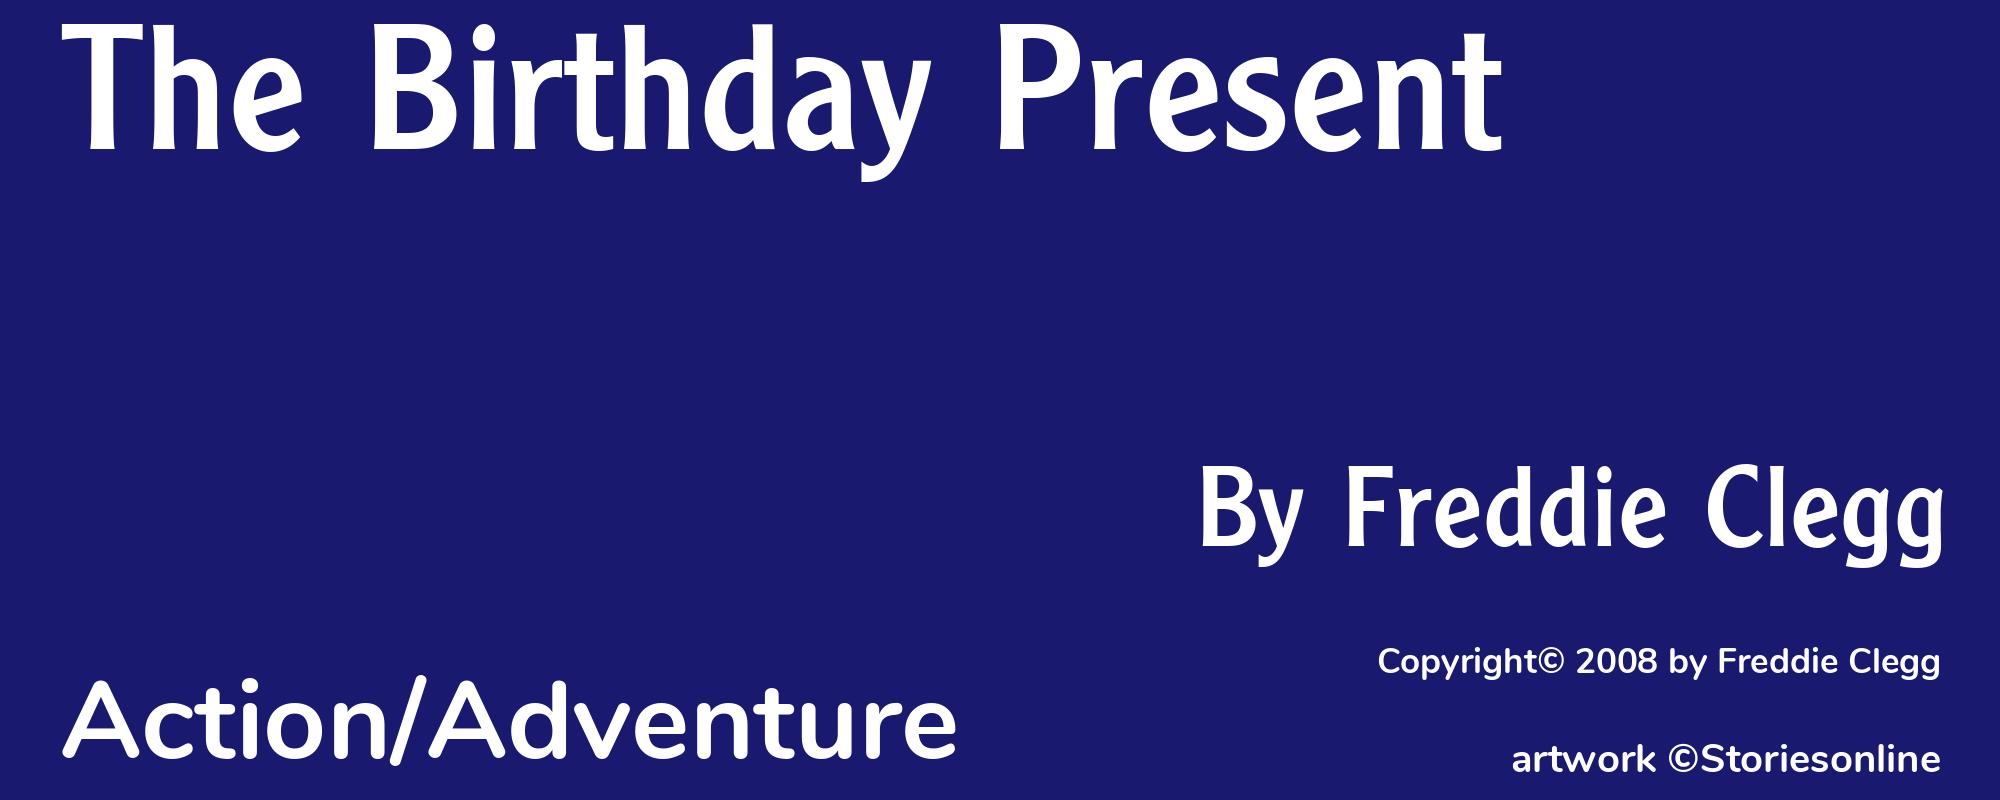 The Birthday Present - Cover